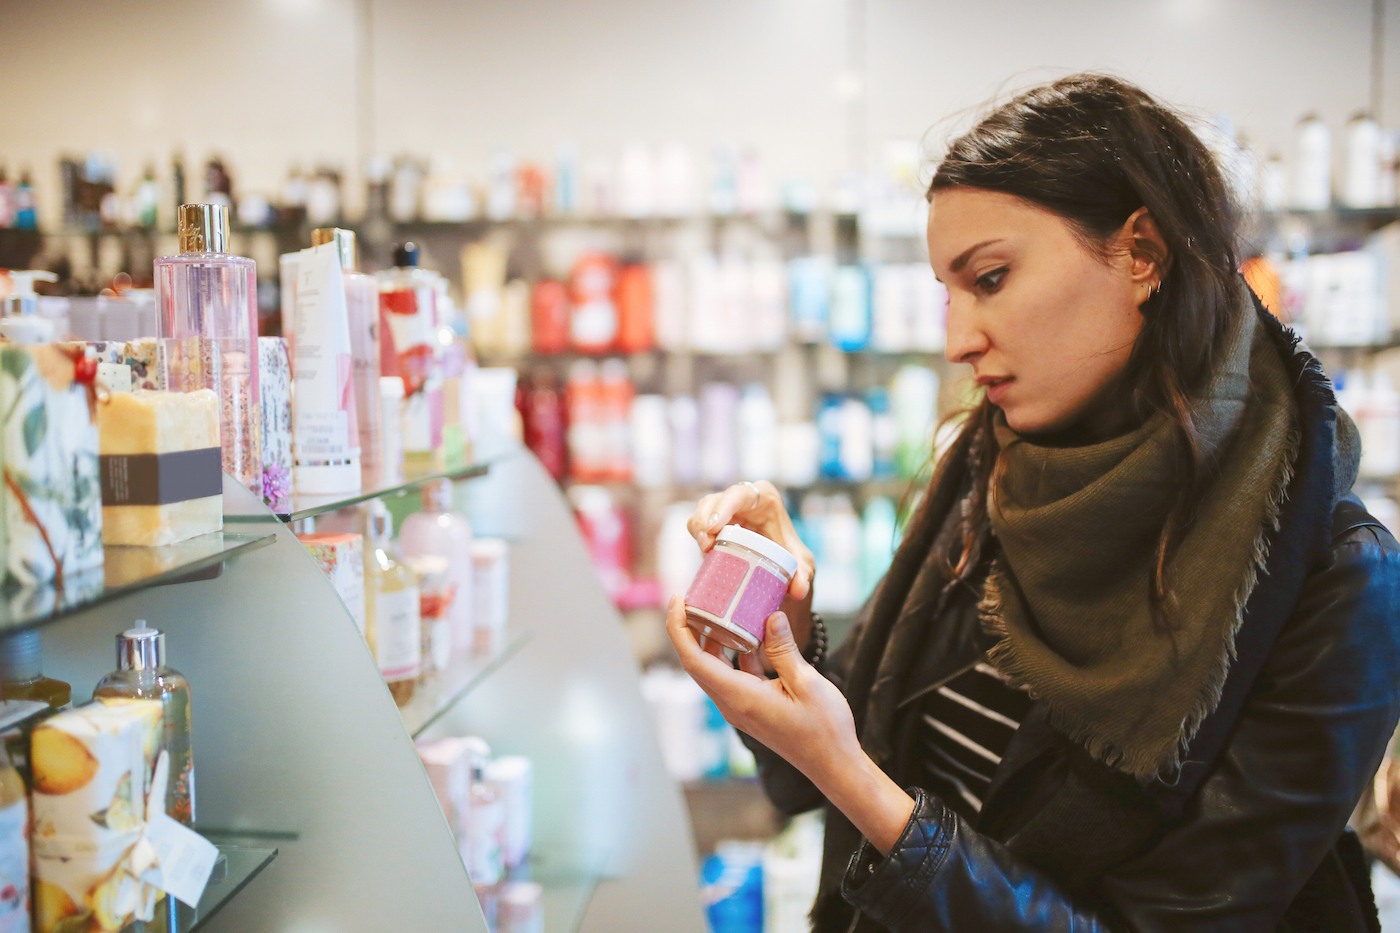 Woman wearing winter clothes looking at beauty products in a makeup store.